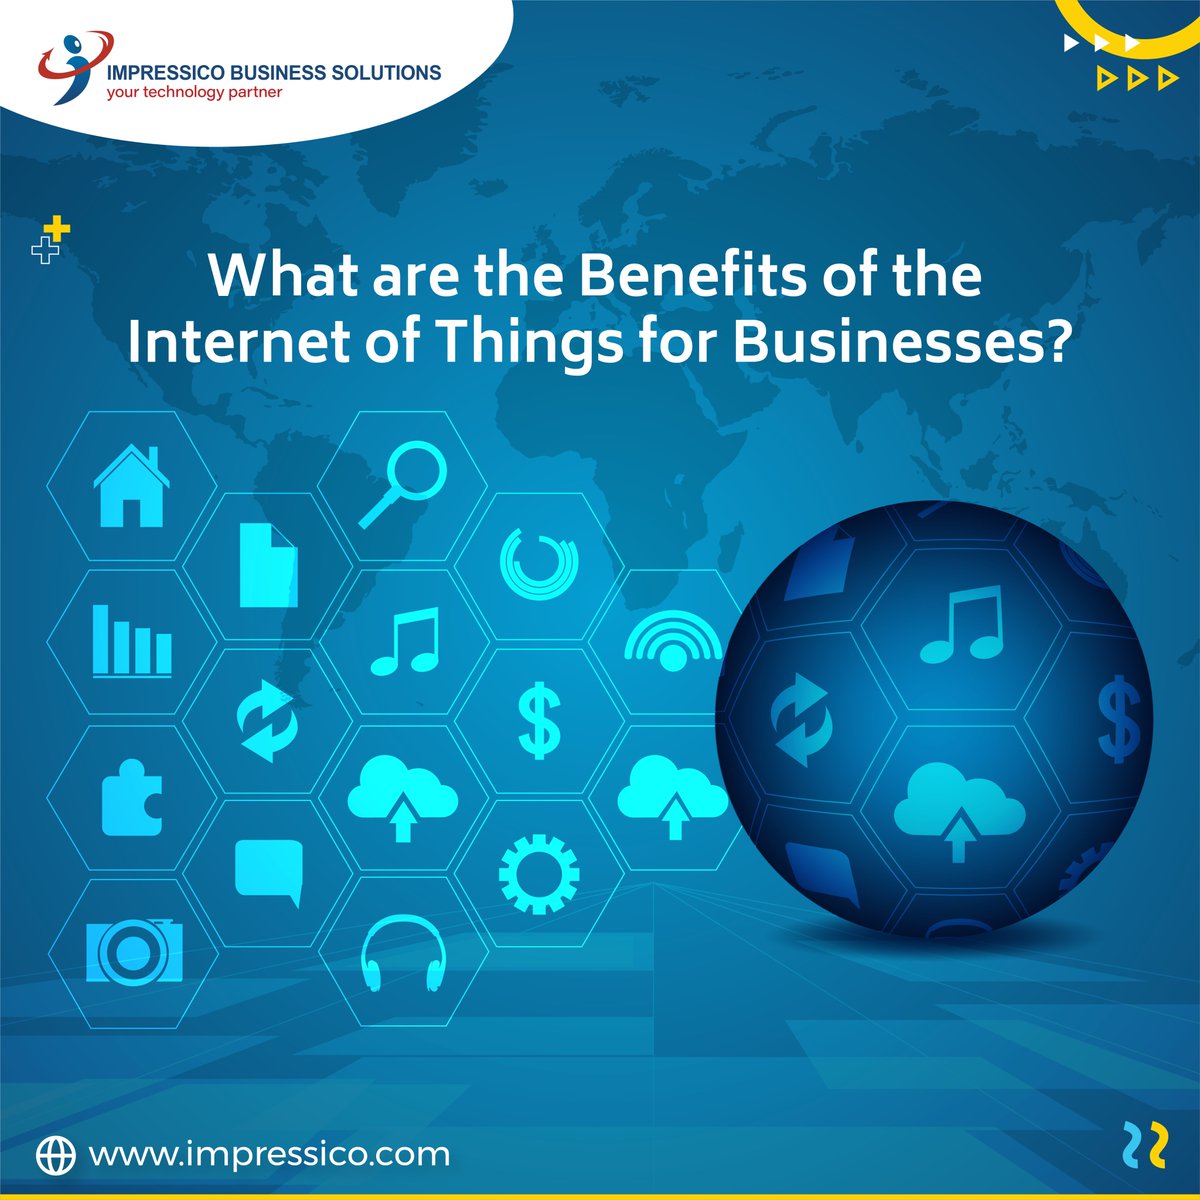 The IoT market is expected to be worth $1.7 T by the end of 2022 and could yield between $4 and $11 T in financial value by the year 2025.
Visit our website to read more: impressico.com/blog/what-are-…

#Impressico #YourTechnologyPartner #IoT #iotsolutions #iottechnology #iotservices